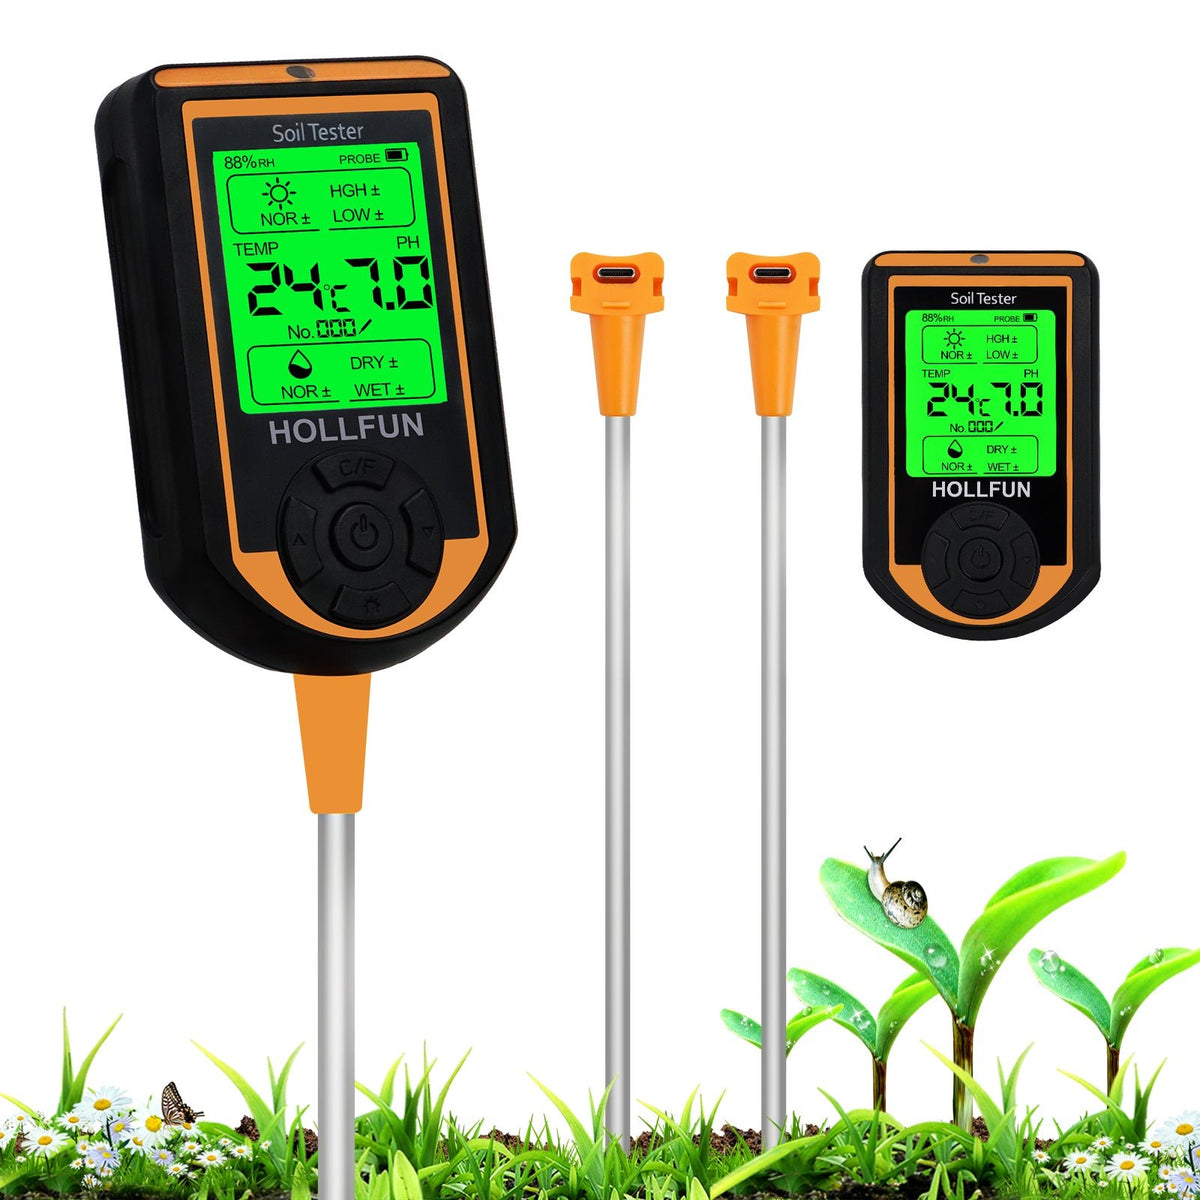 Soil Humidity Tester,, 3 In 1 Function 10.2x2.4x1.6 Inch Soil